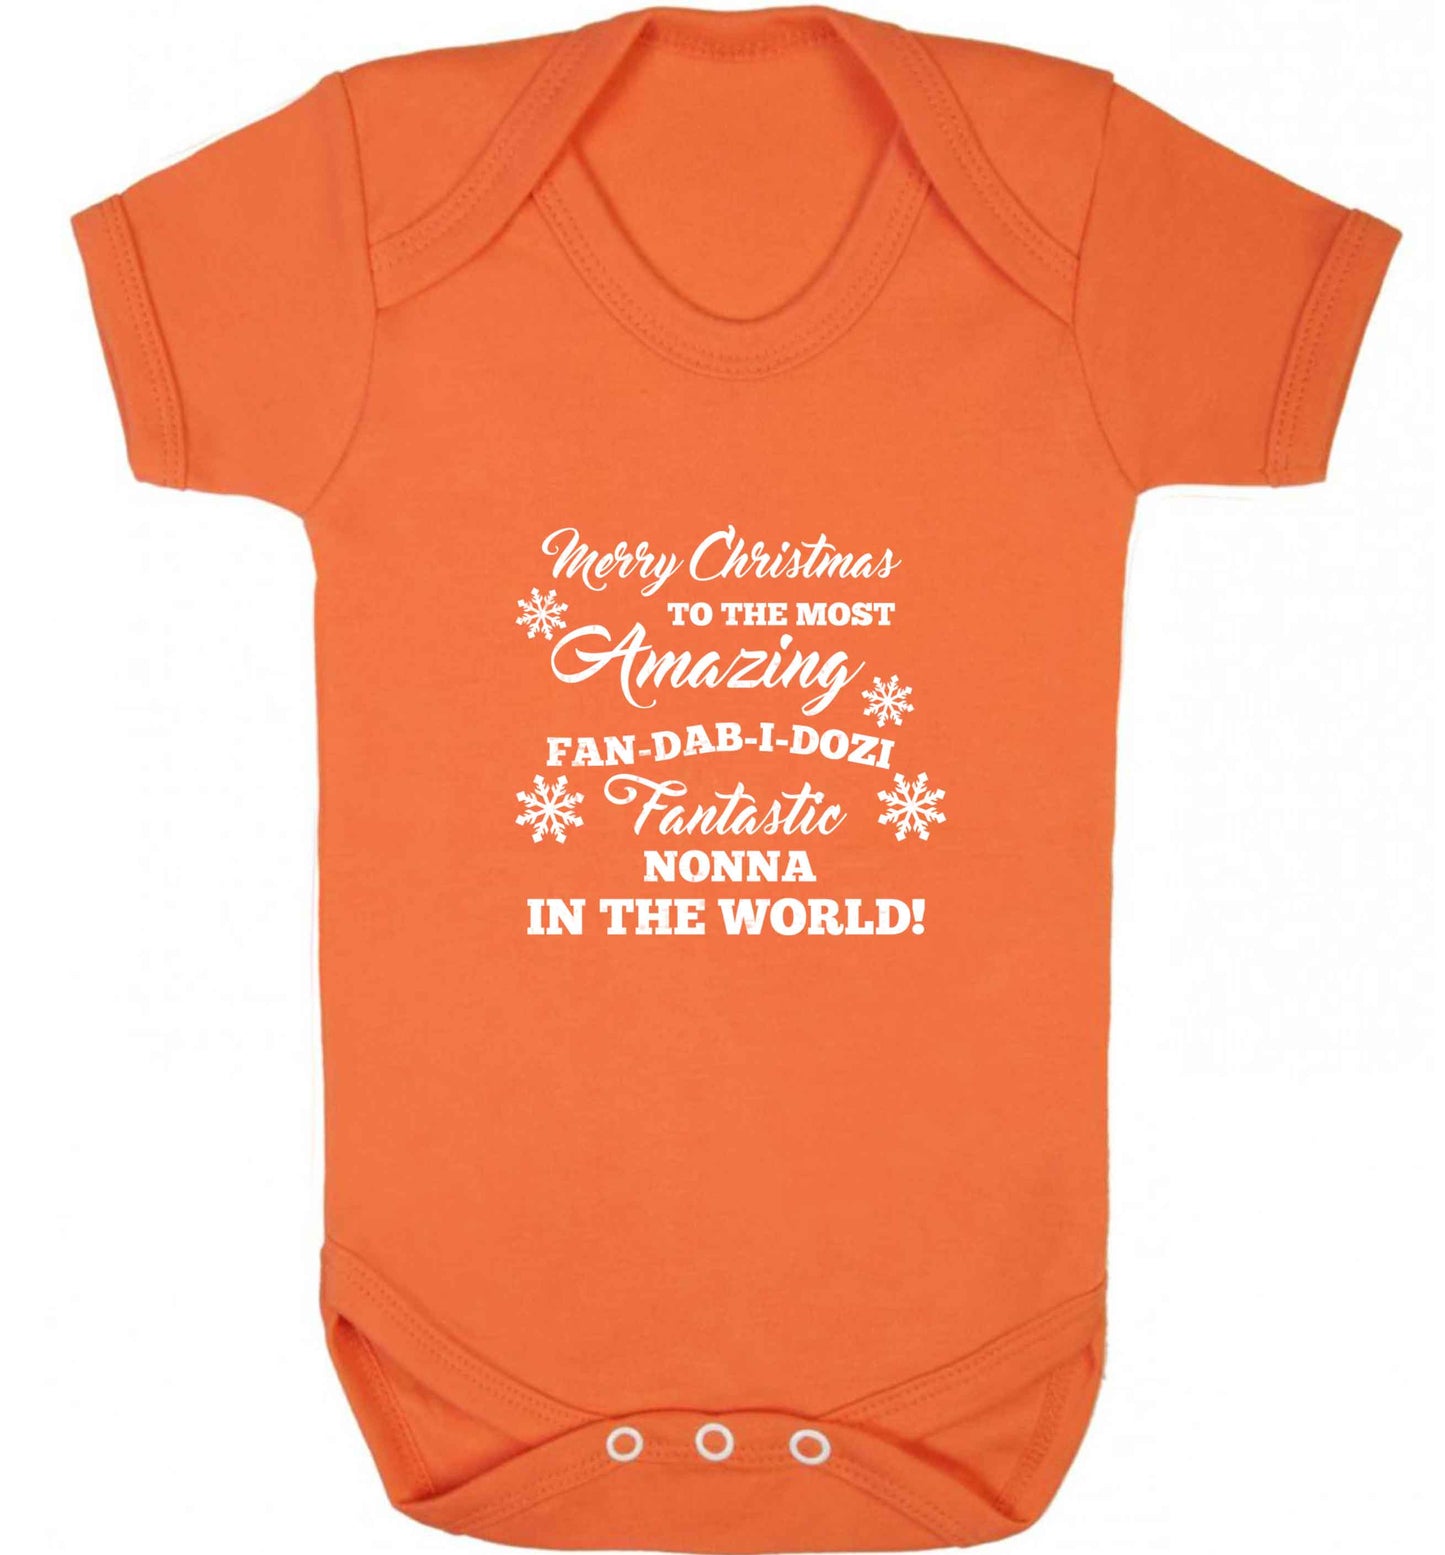 Merry Christmas to the most amazing fan-dab-i-dozi fantasic Nonna in the world baby vest orange 18-24 months